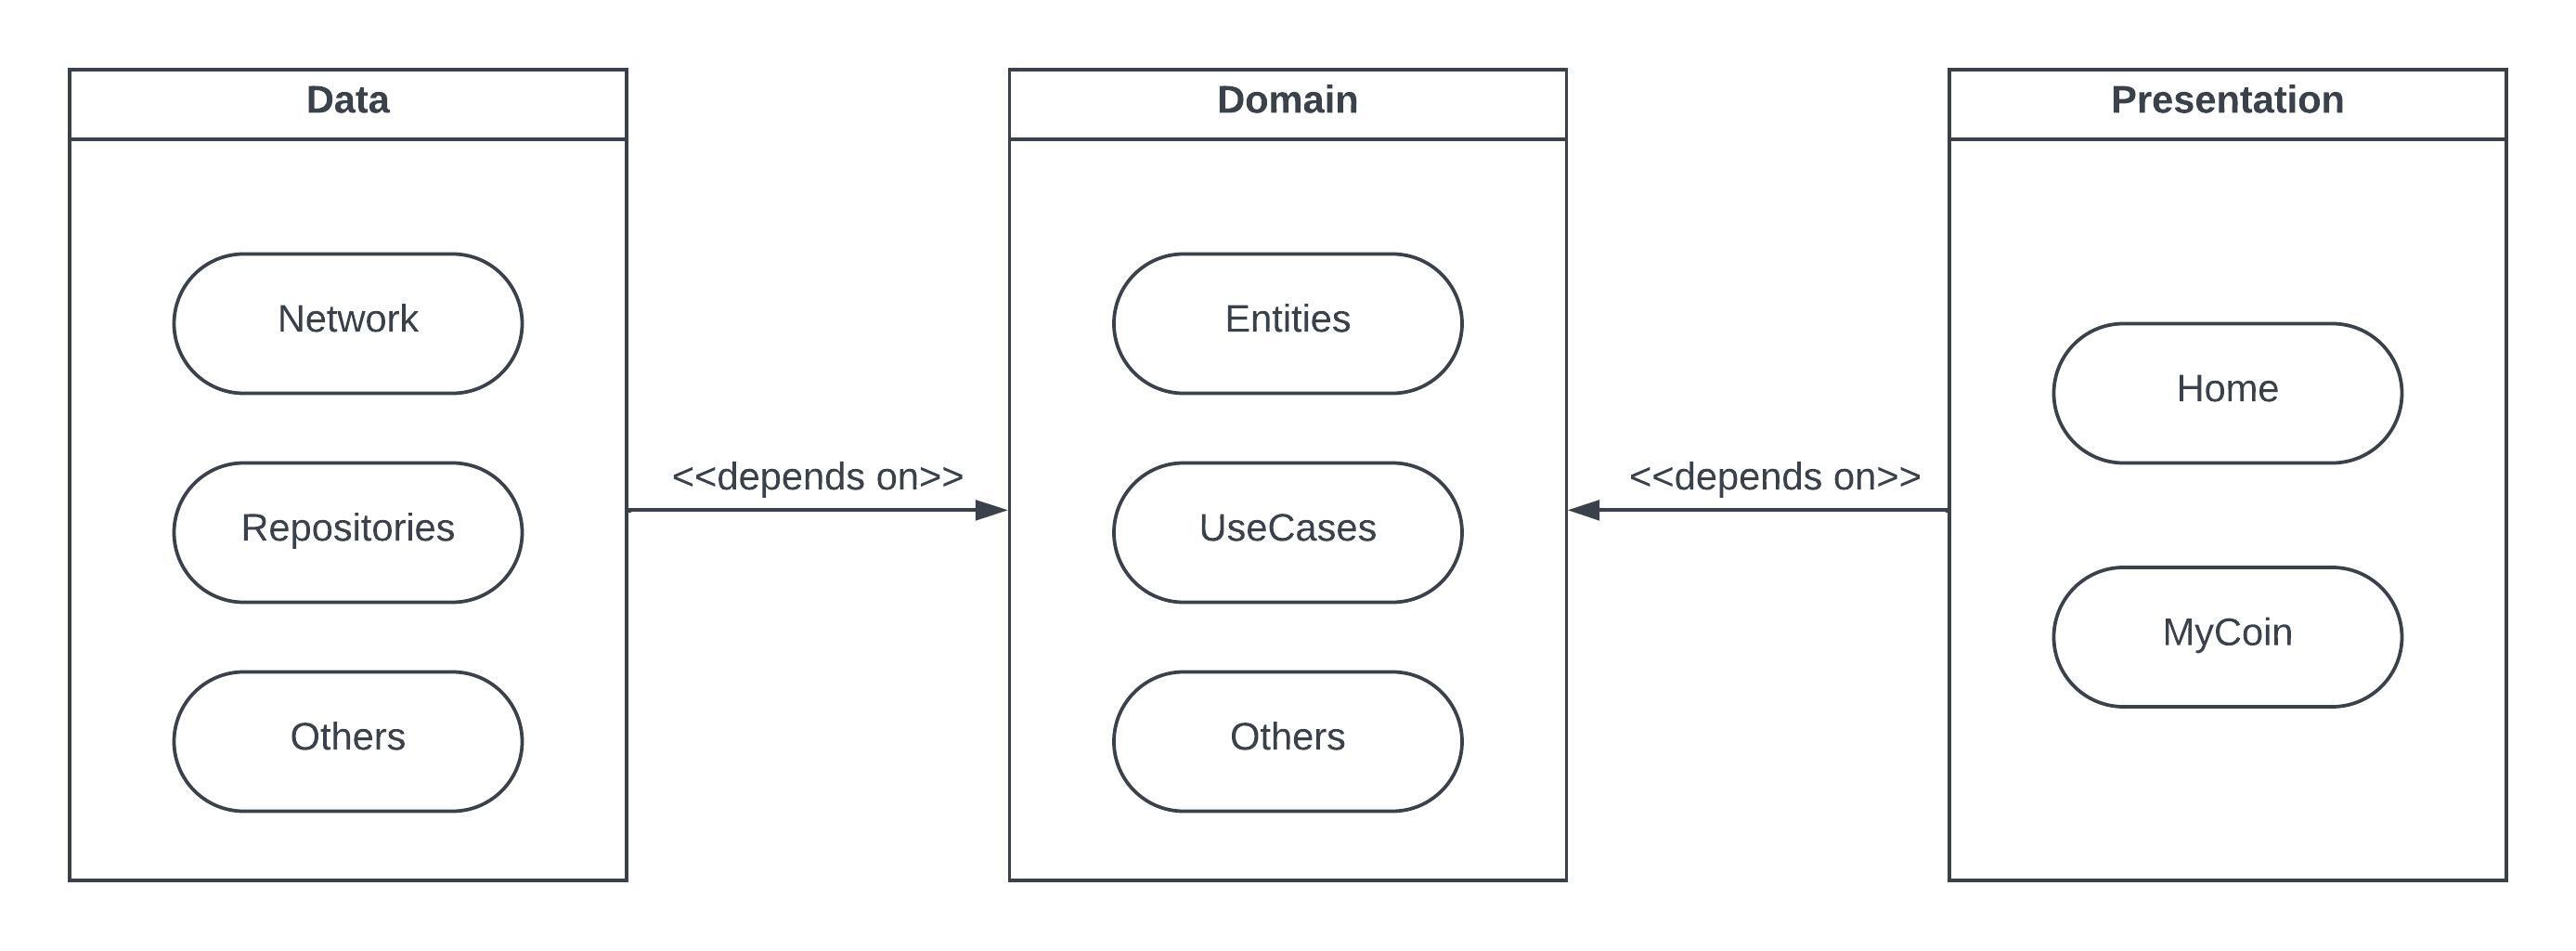 Clean Architecture modules' relationships